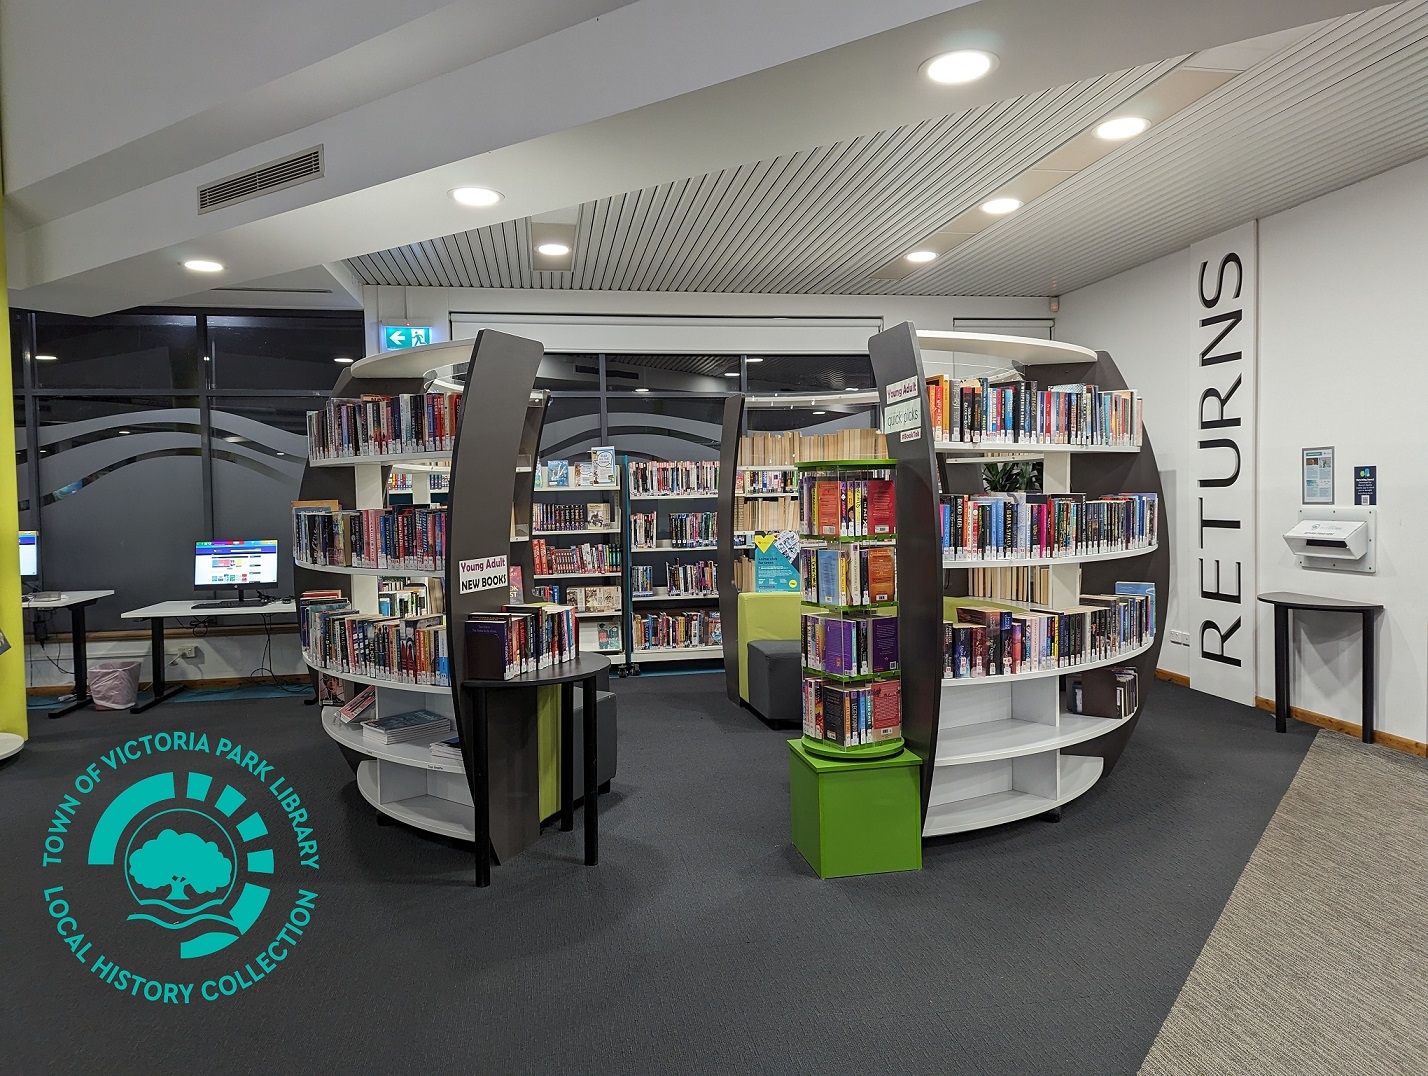 PH00051-04 Another view of the Young Adult Collection with its distinct round shelving and internal seating, Town of Victoria Park Library. Image